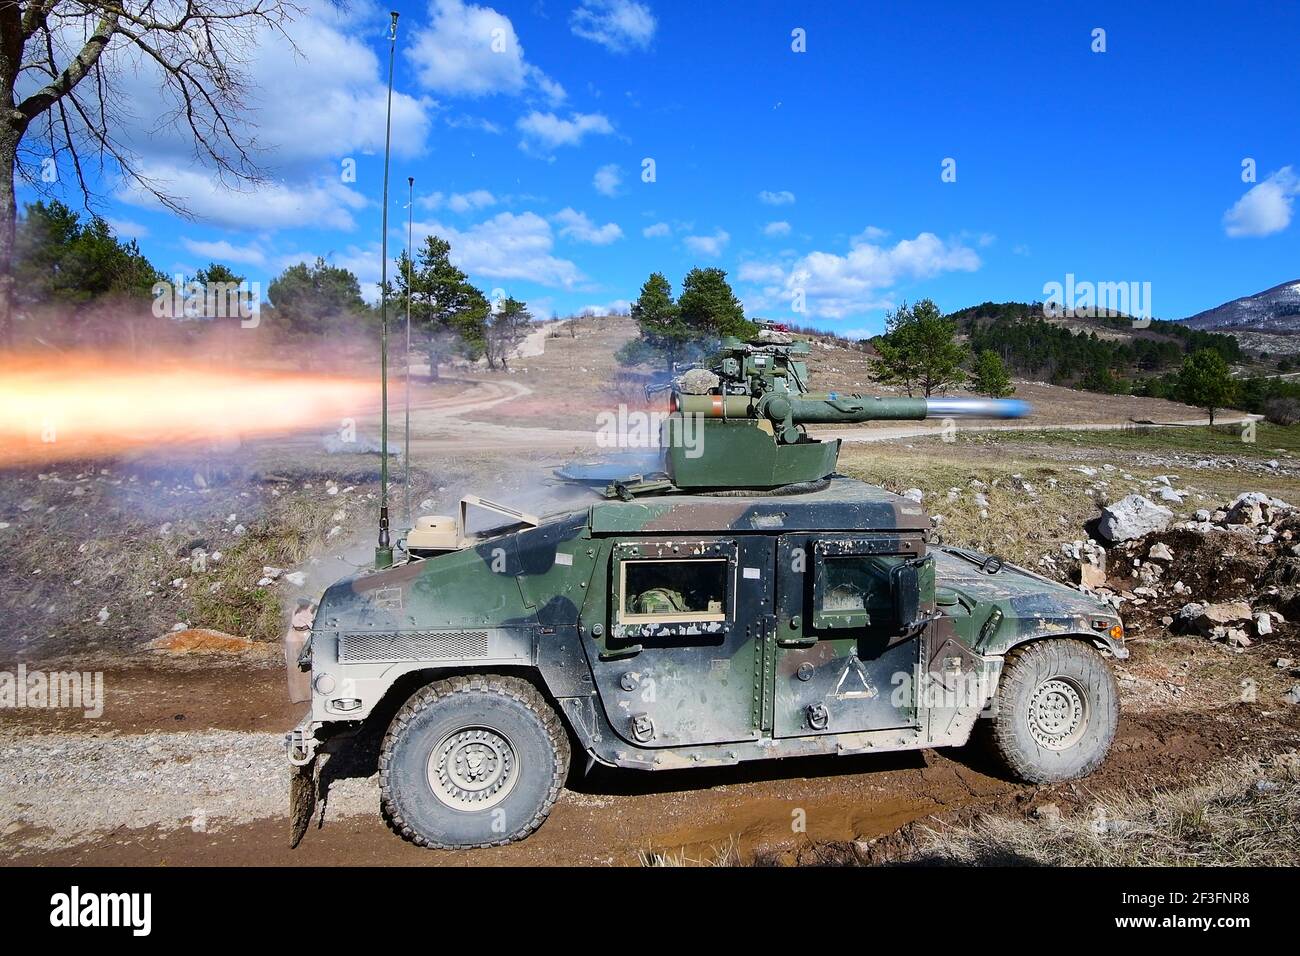 Postonja, Slovenia. 16th Mar, 2021. A U.S. Army Paratrooper assigned to the Dog Company, 1st Battalion, 503rd Infantry Regiment, 173rd Airborne Brigade, fires anti-tank, TOW missile from a Humvee during Exercise Eagle Sokol 21 at Pocek Range March 16, 2021 in Postonja, Slovenia. Credit: Planetpix/Alamy Live News Stock Photo